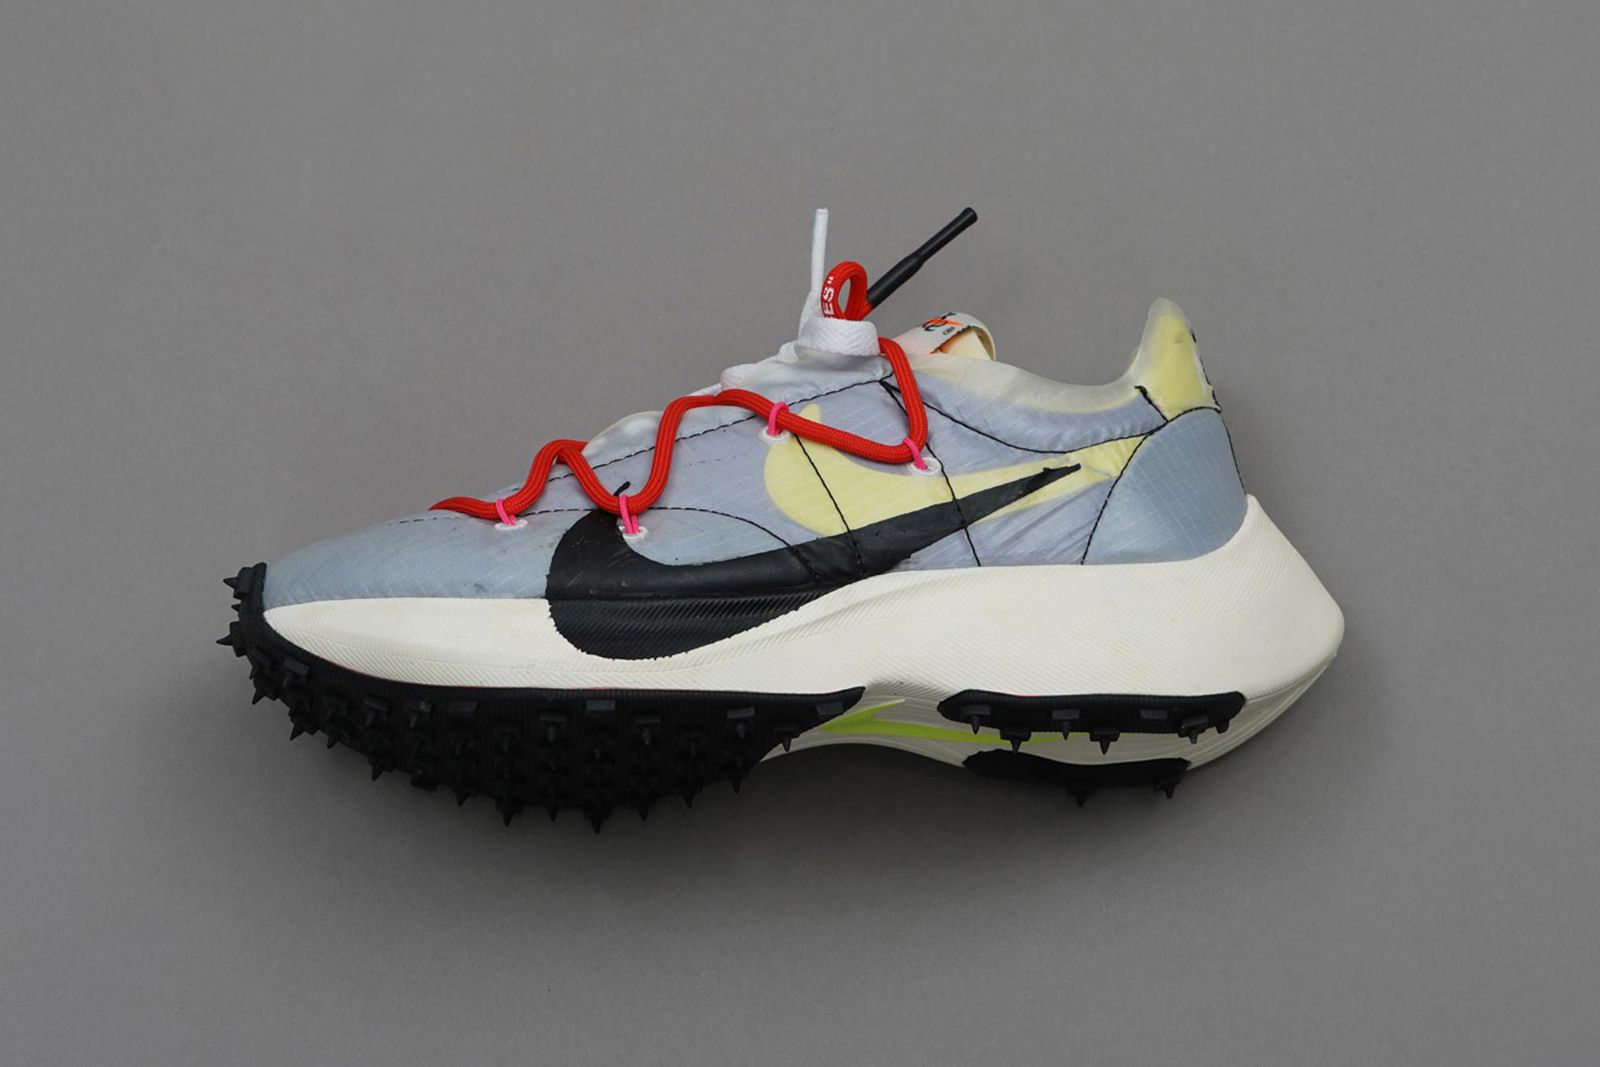 A Look at All Unreleased OFF-WHITE x Nike at MCA